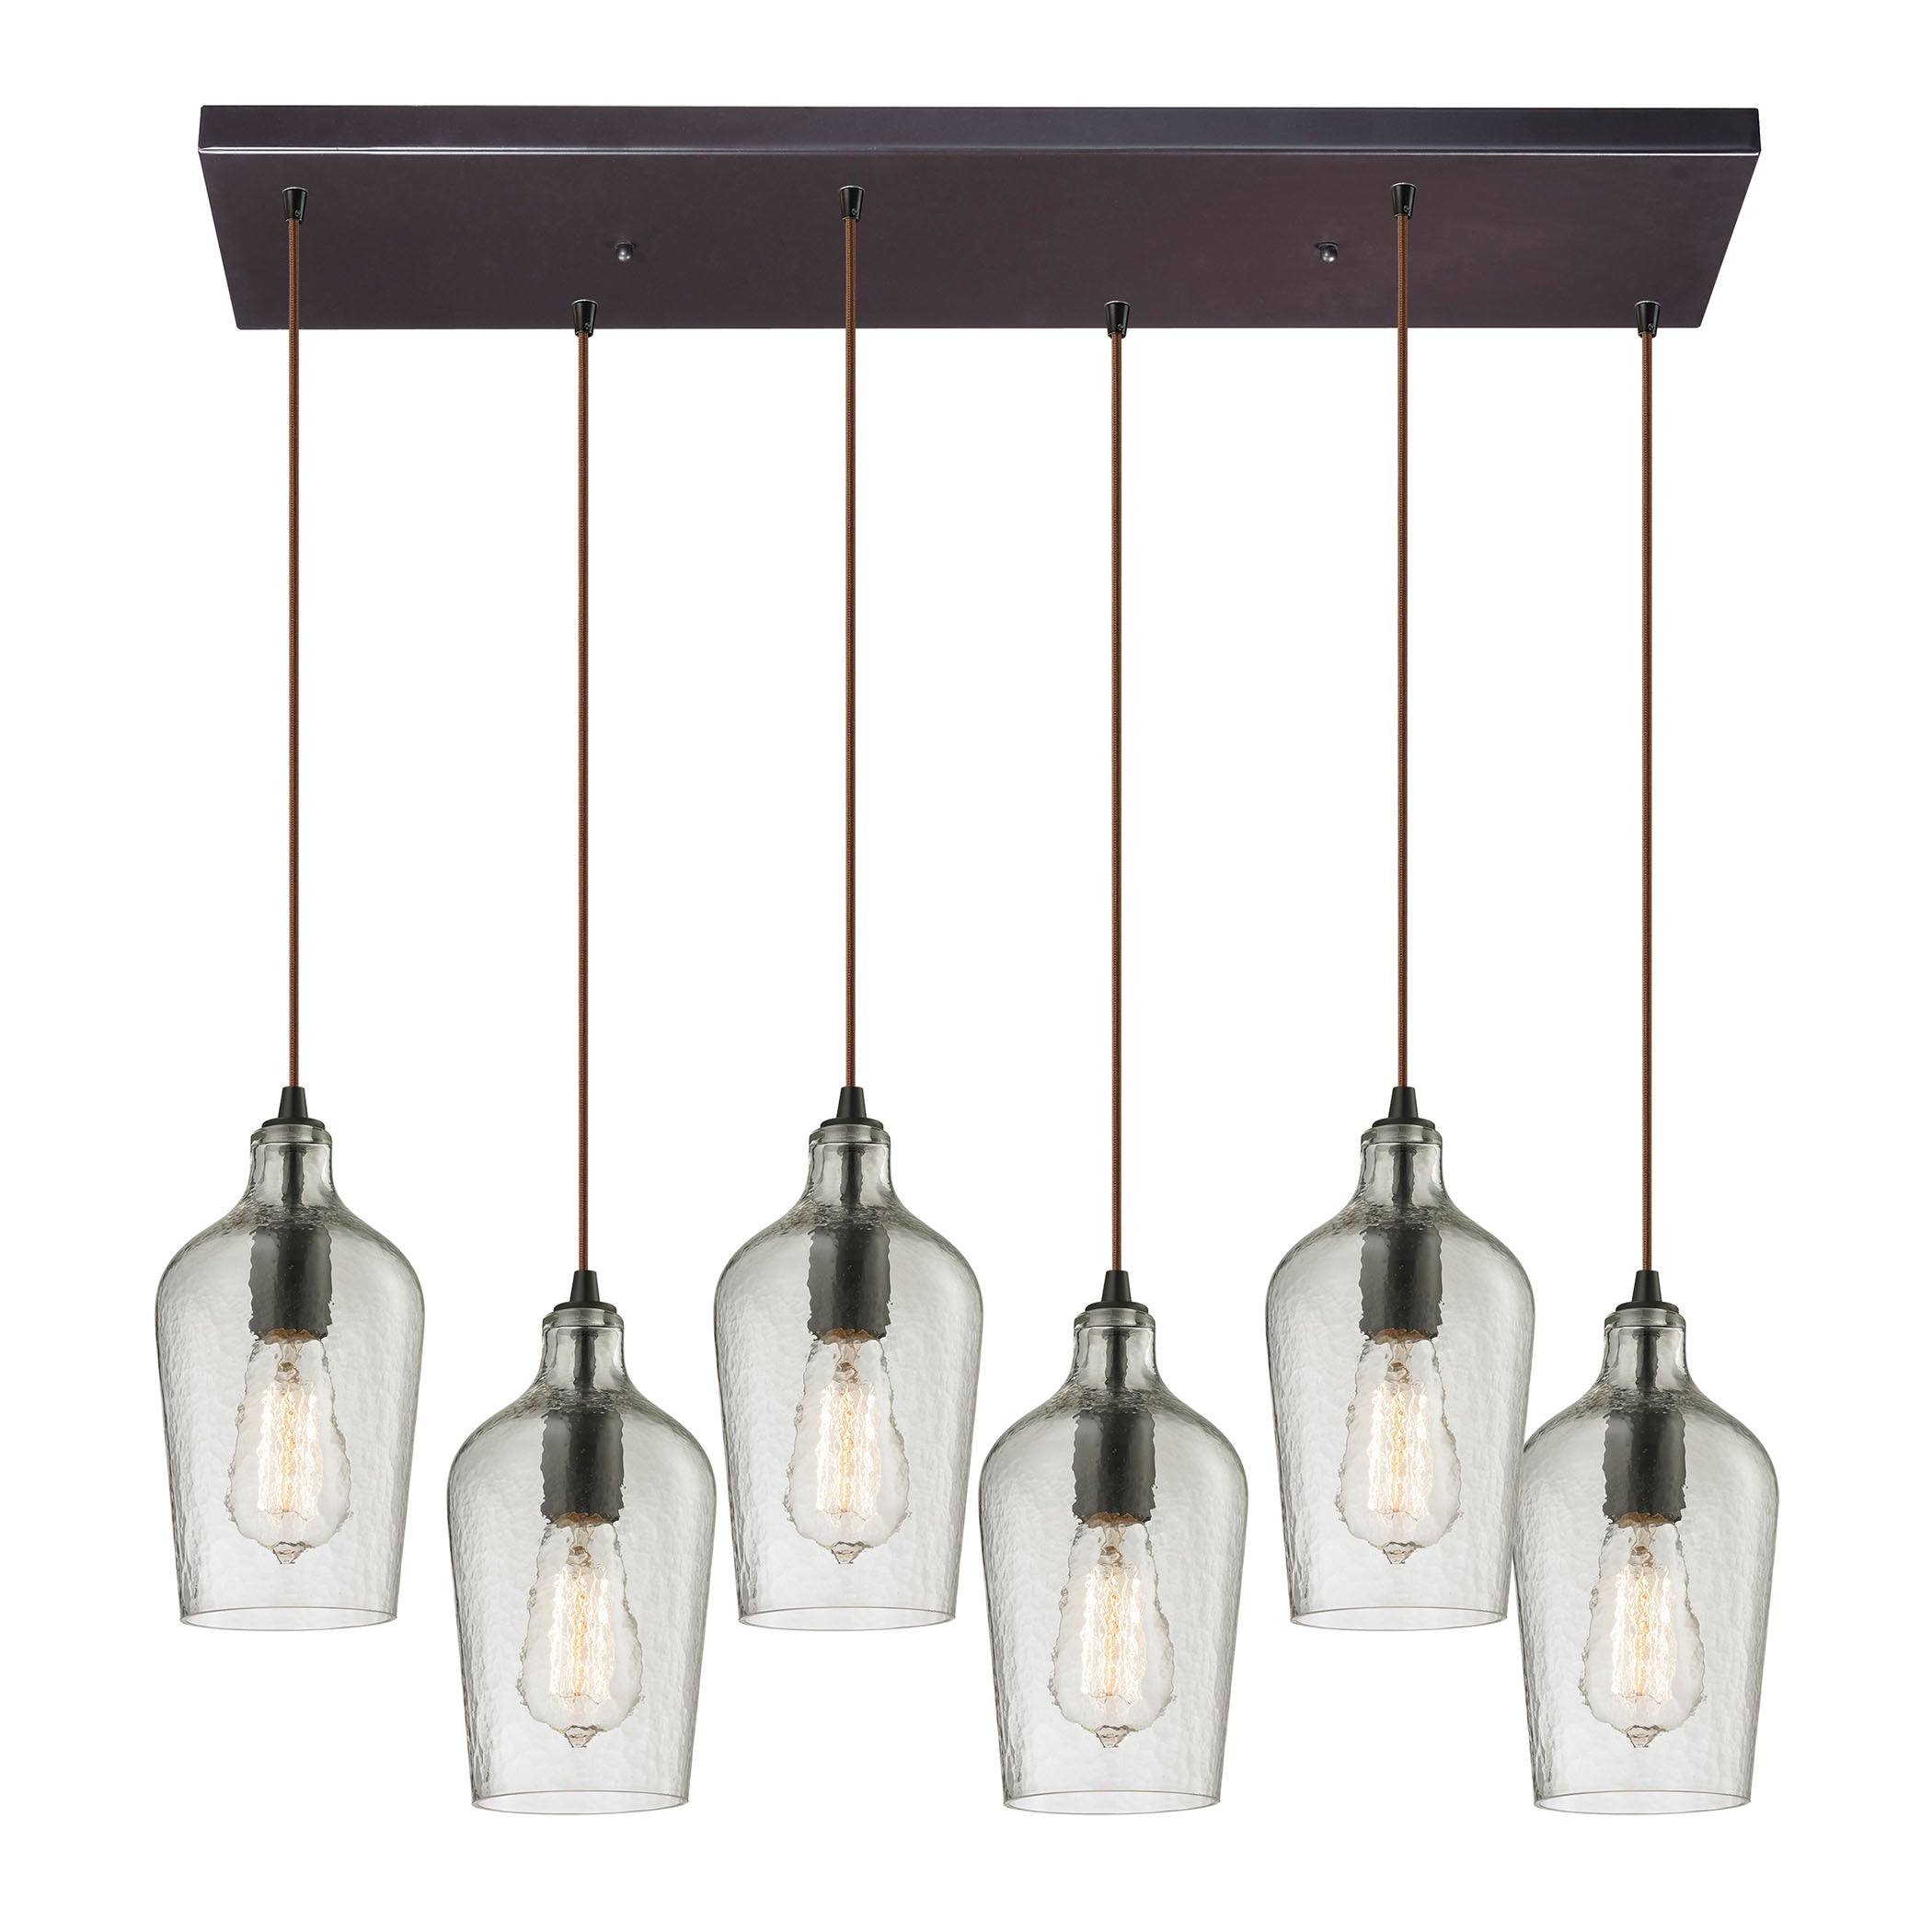 ELK Lighting 10331/6RC-CLR Hammered Glass 6-Light Rectangular Pendant Fixture in Oiled Bronze with Hammered Clear Glass